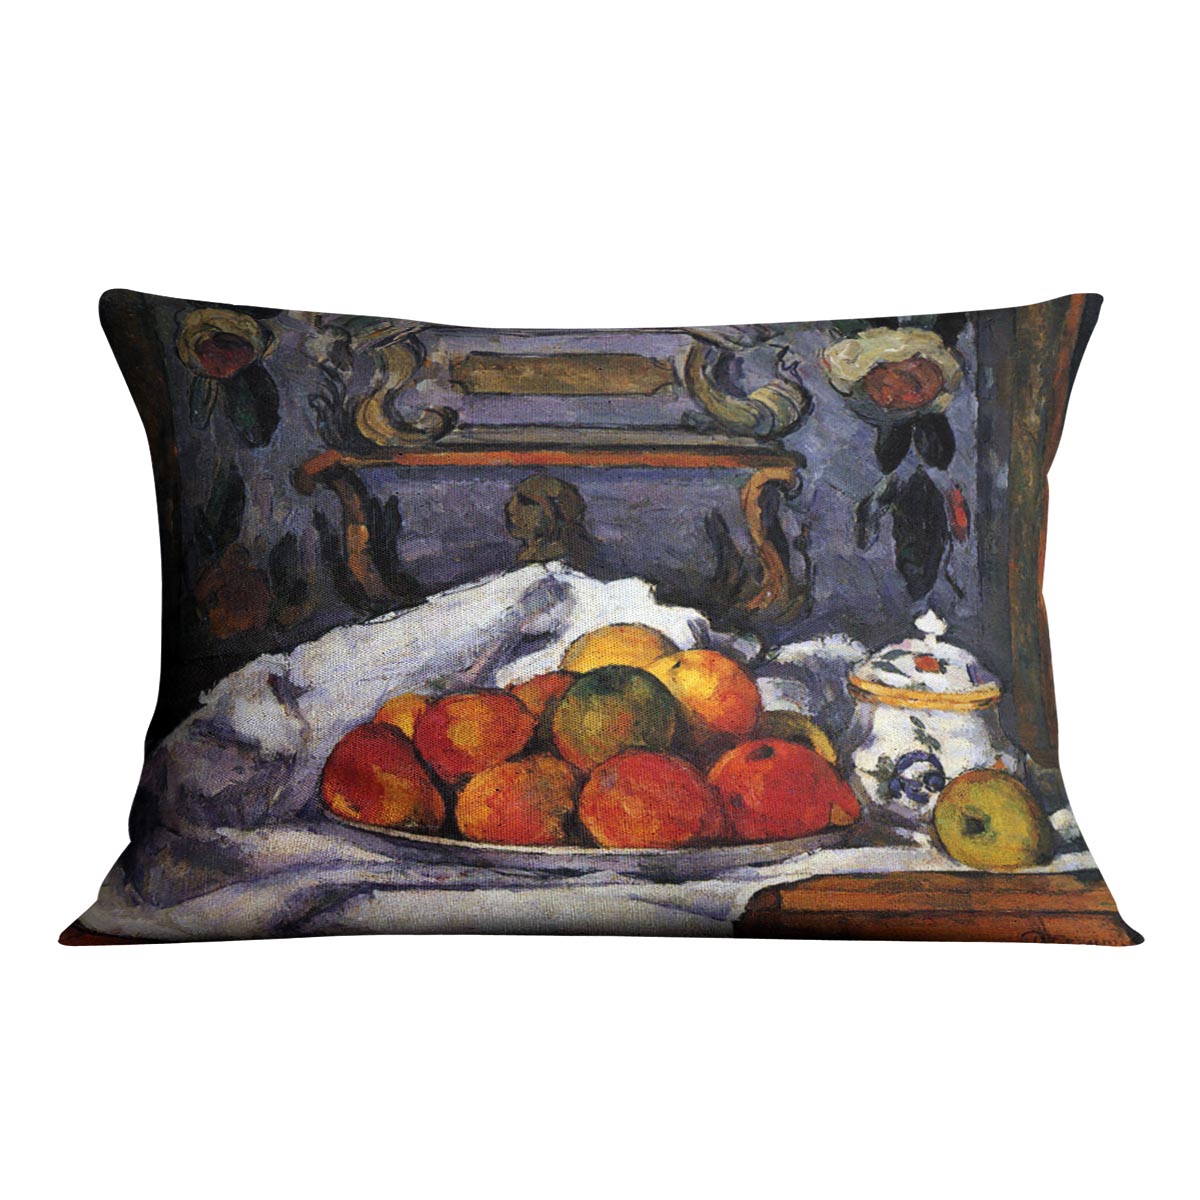 Still life bowl of apples by Cezanne Cushion